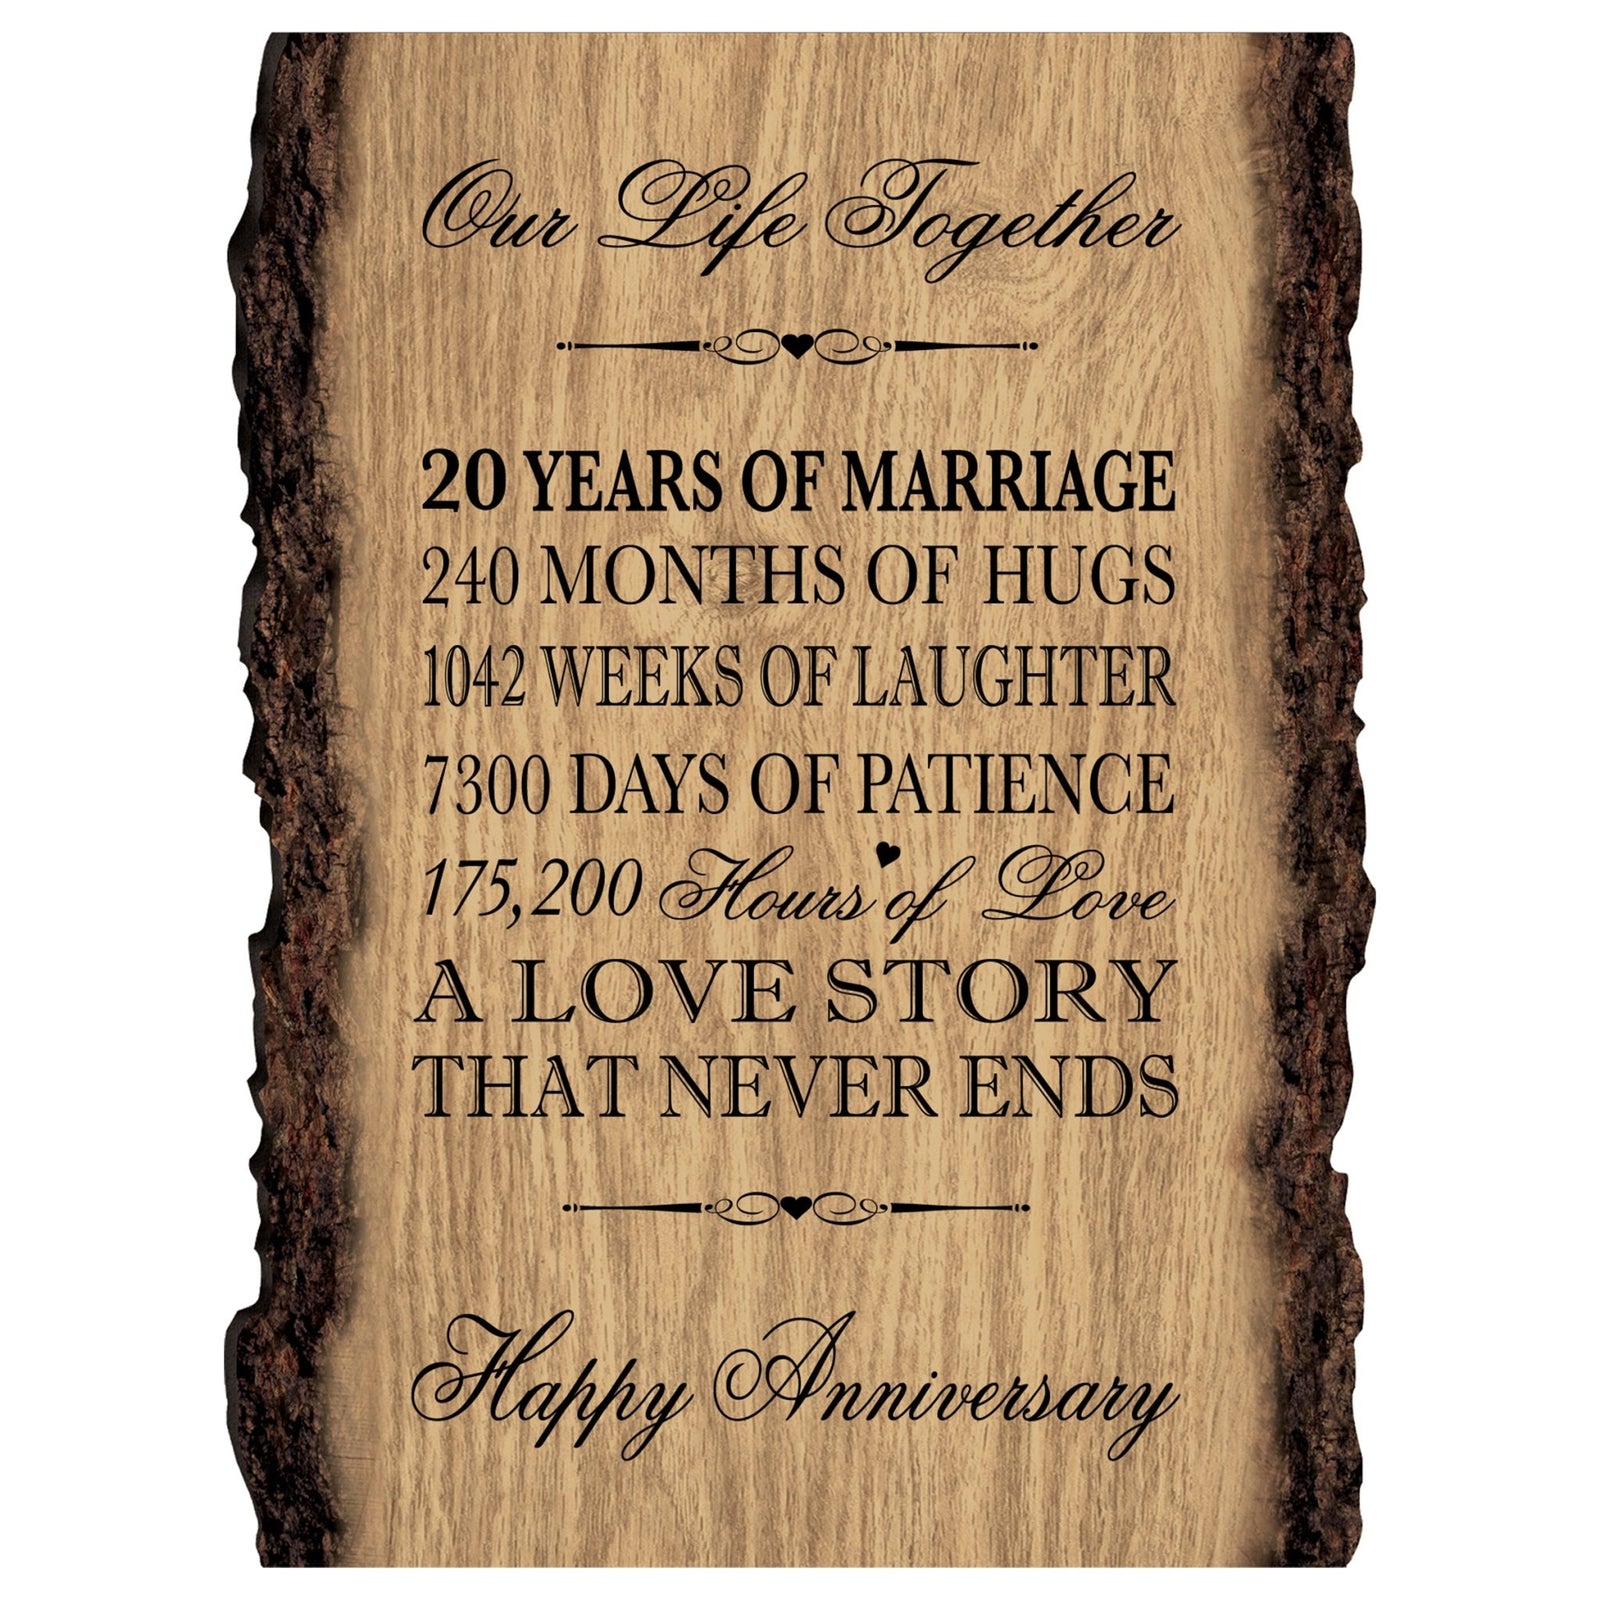 Rustic Wedding Anniversary 9x12 Barky Wall Plaque Gift For Parents, Grandparents New Couple - 20 Years Of Marriage - LifeSong Milestones